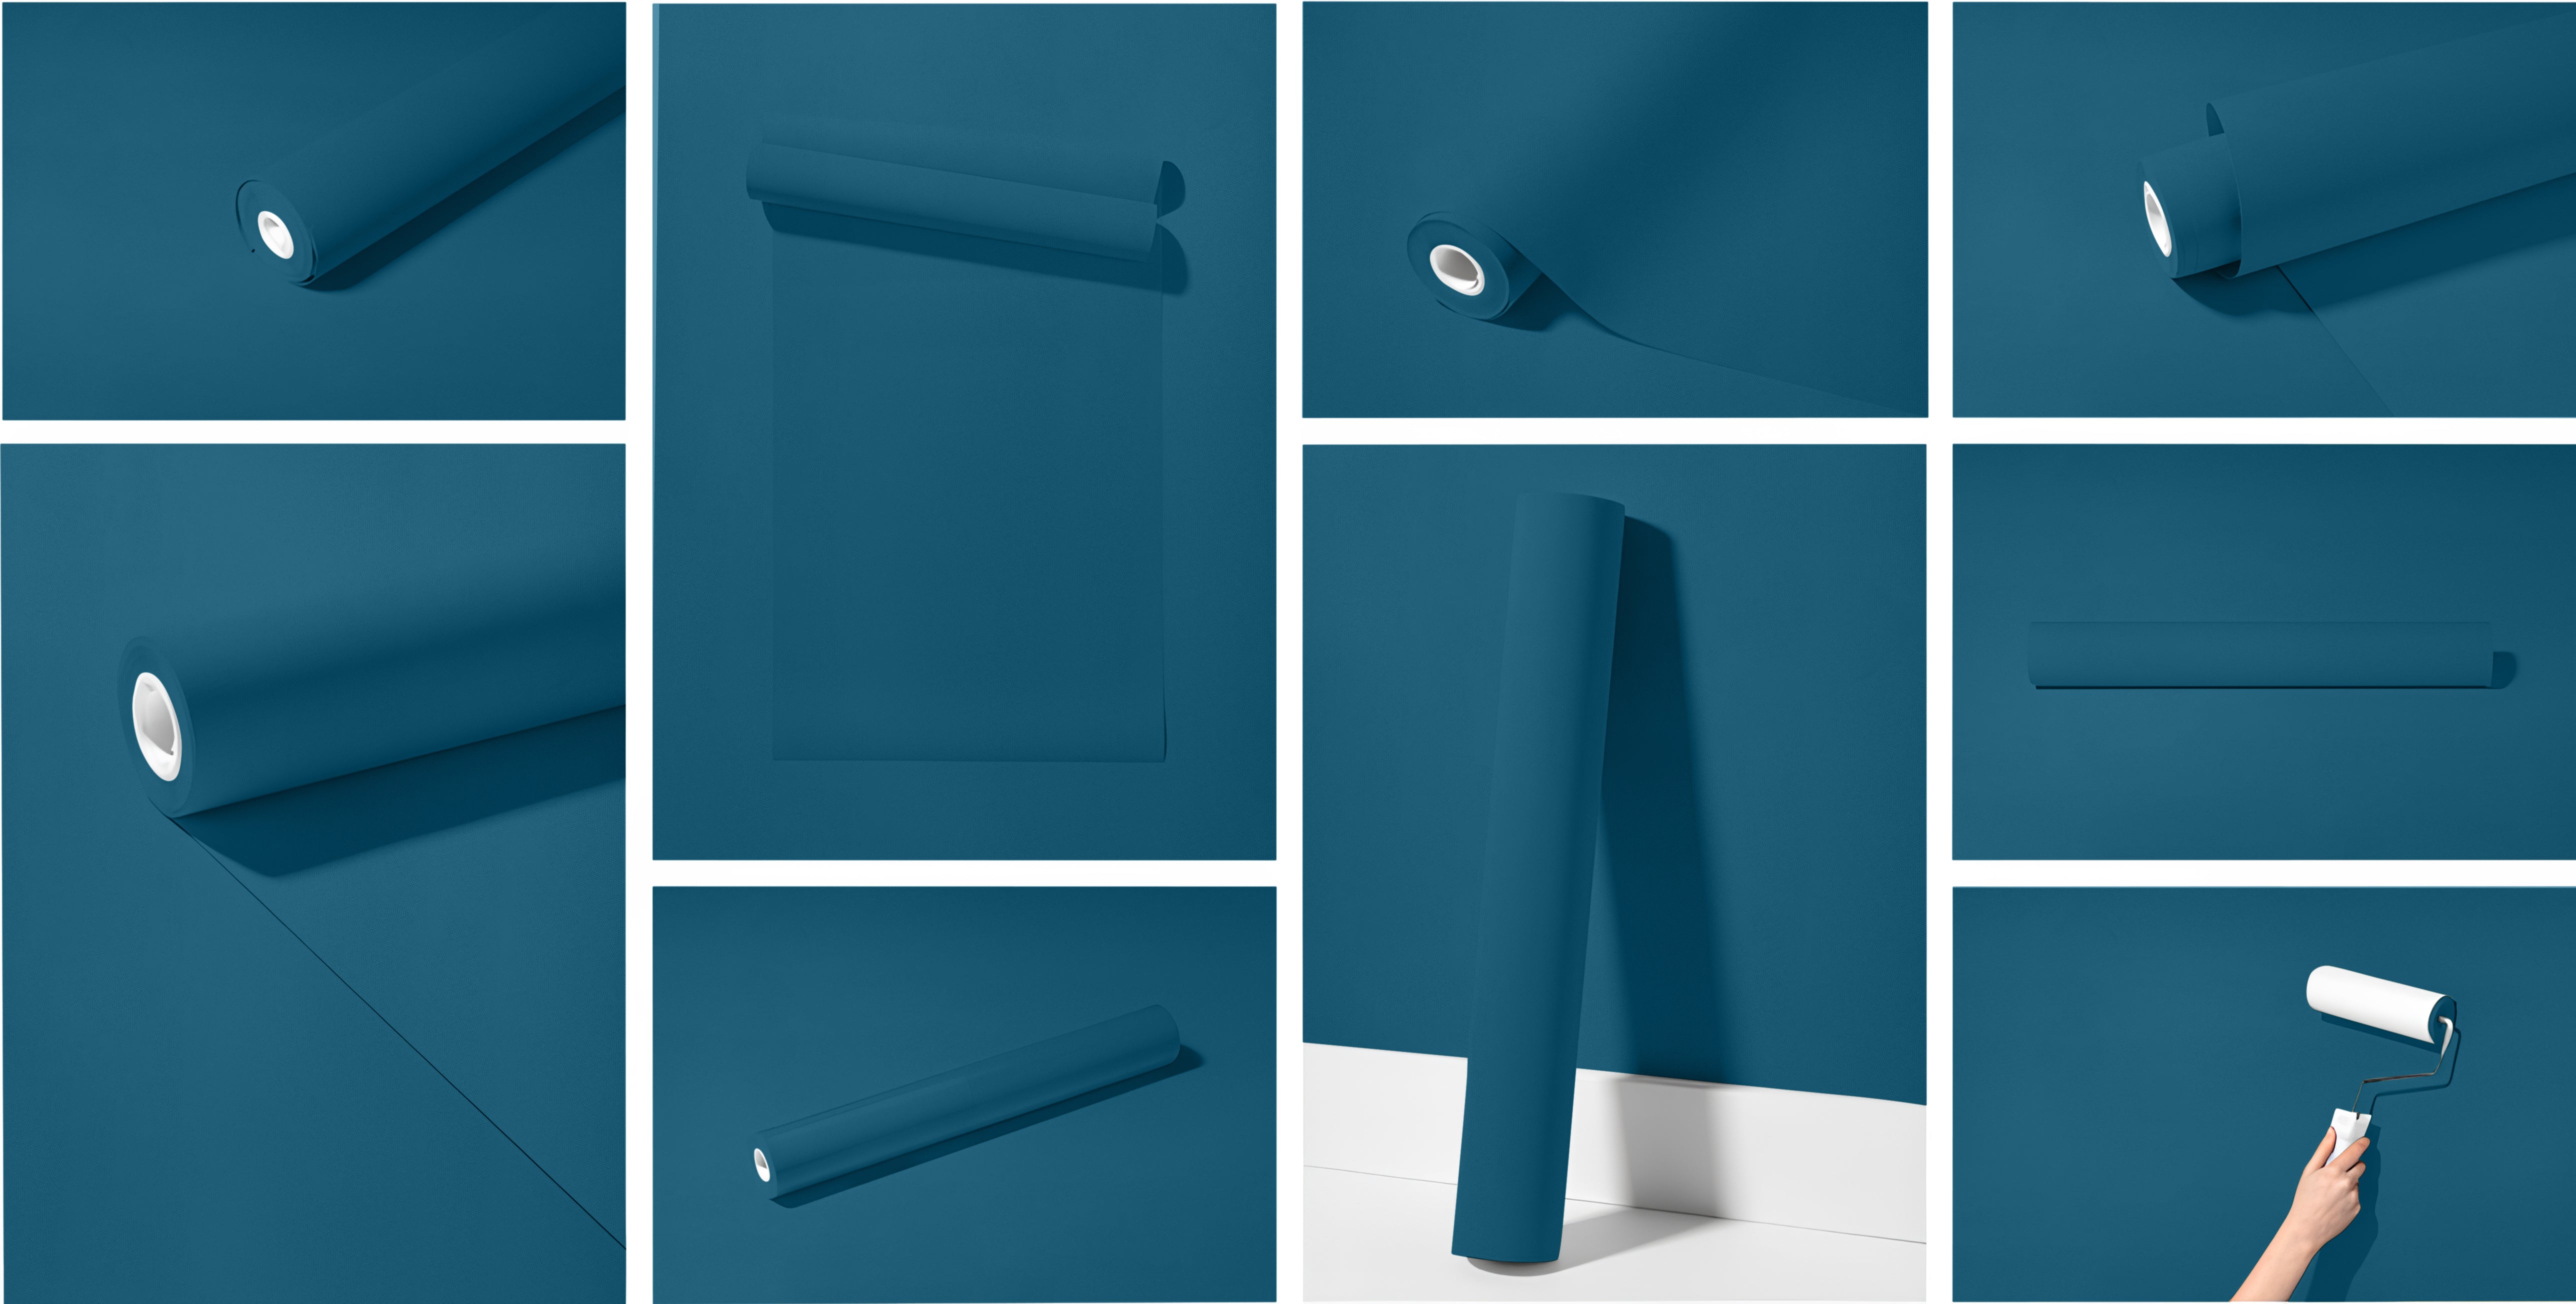 Peel & Stick Removable Re-usable Paint - Color RAL 5009 Azure Blue - offRAL™ - RALRAW LLC, USA